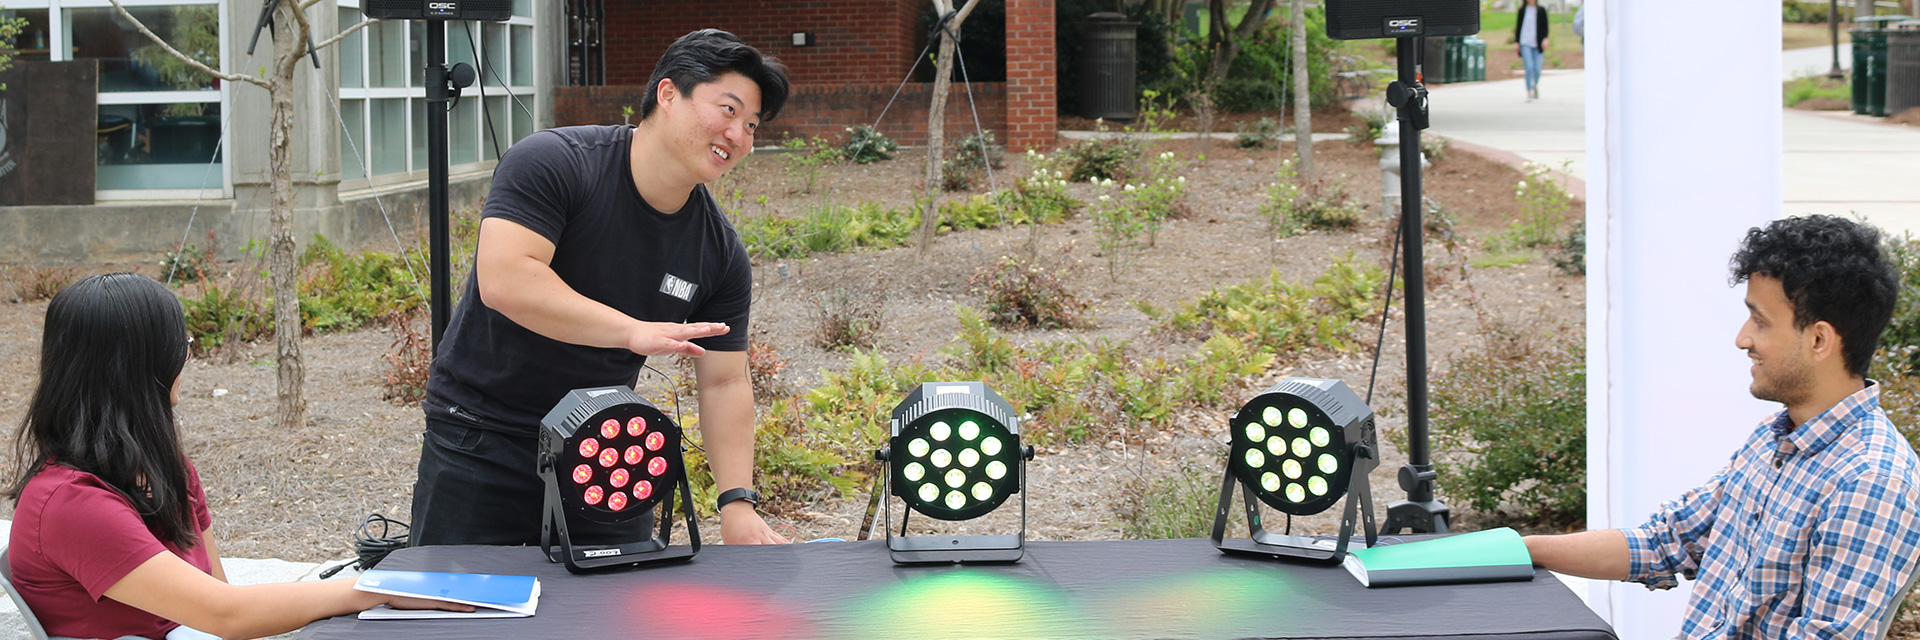 Timothy Min demonstrates his project at Georgia Tech Arts Plaza